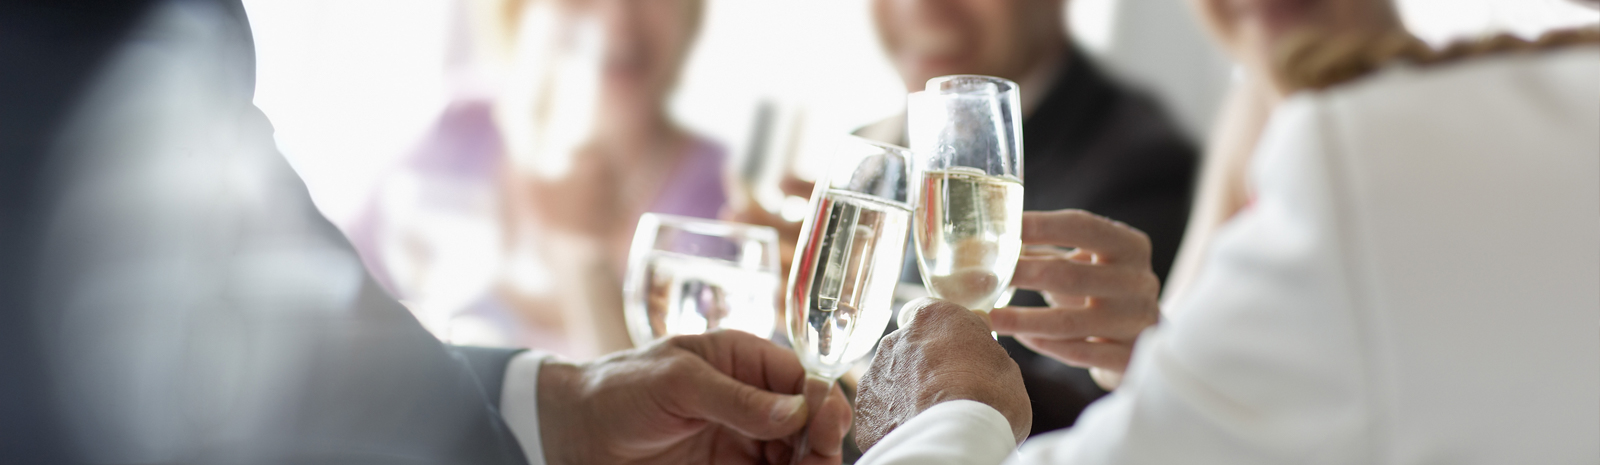 Group Of Party Goers Toast To Event